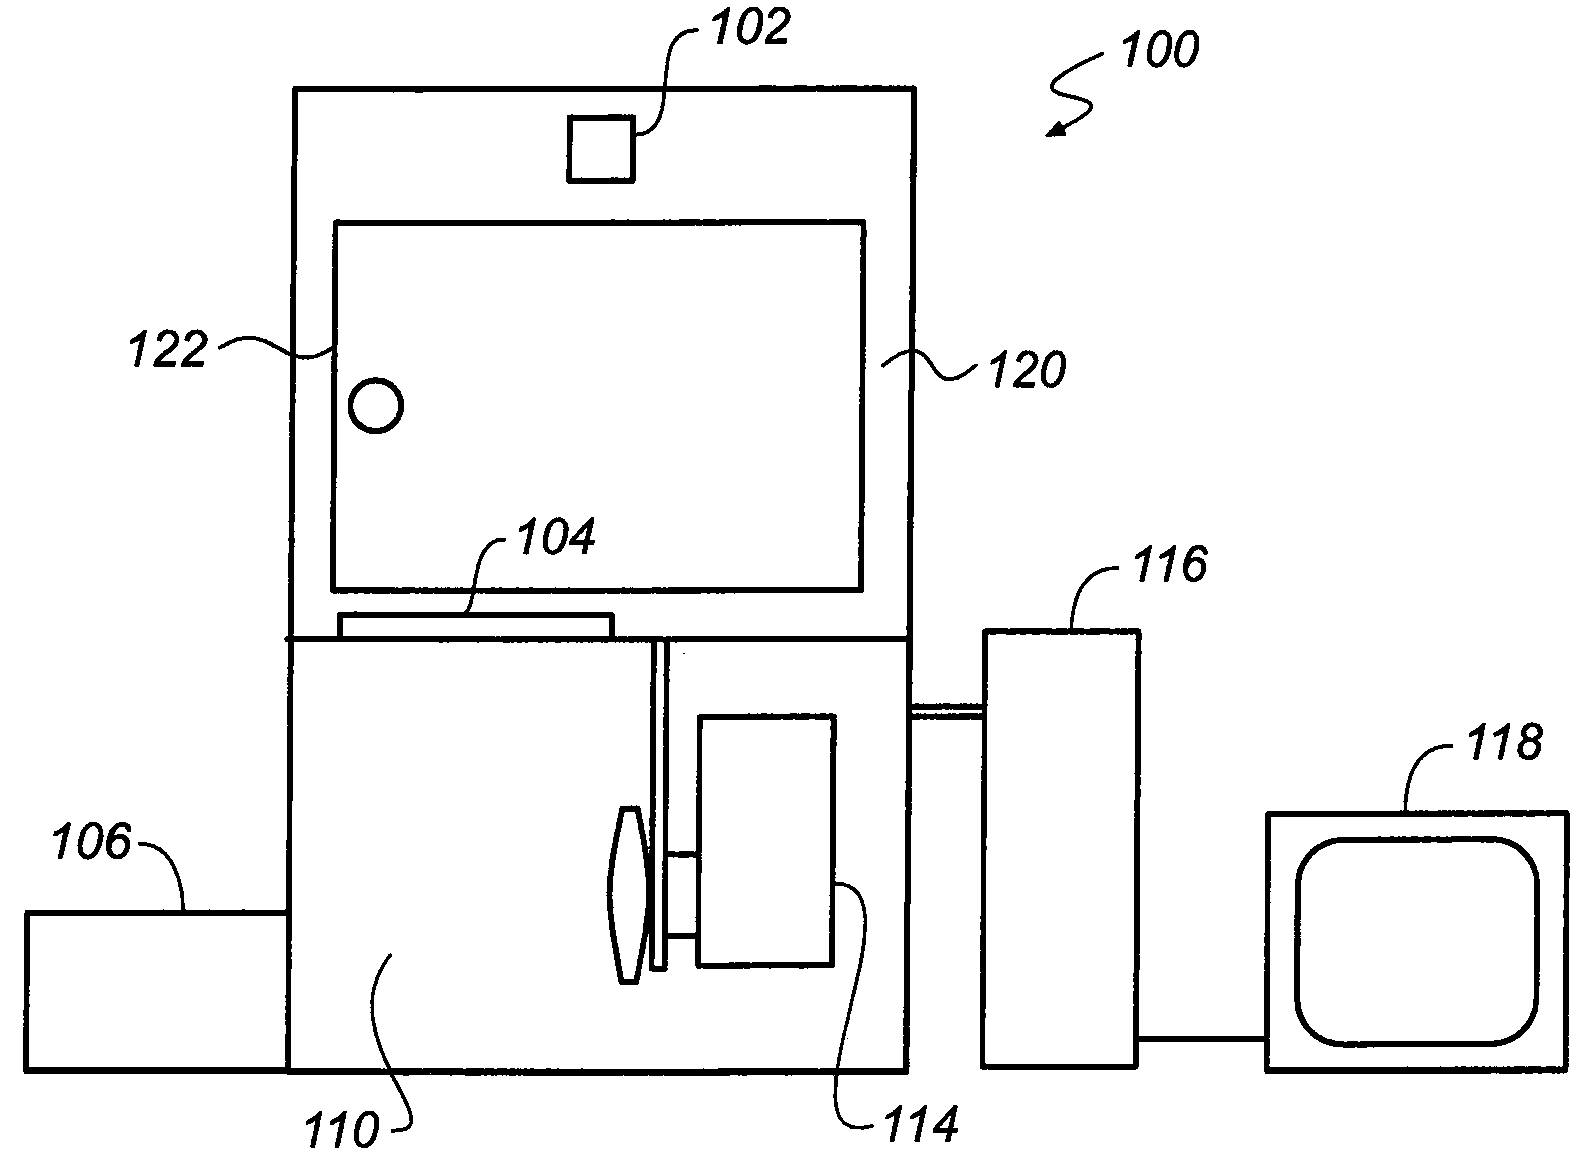 Apparatus and method for external fluorescence imaging of internal regions of interest in a small animal using an endoscope for internal illumination